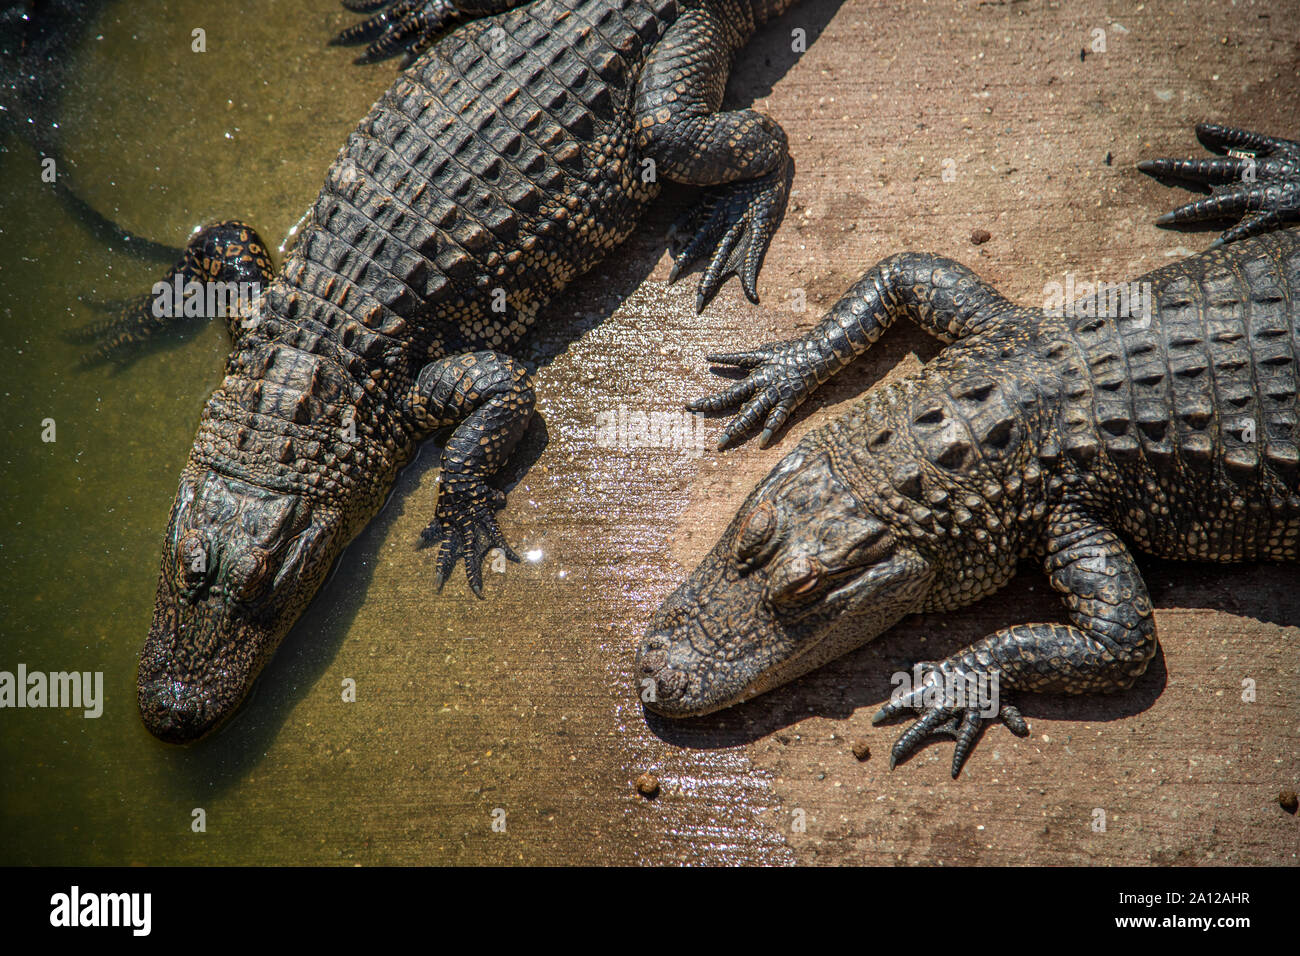 A congregation of American alligators resting next to a pond enclosure at a private zoo in Michigan. Stock Photo